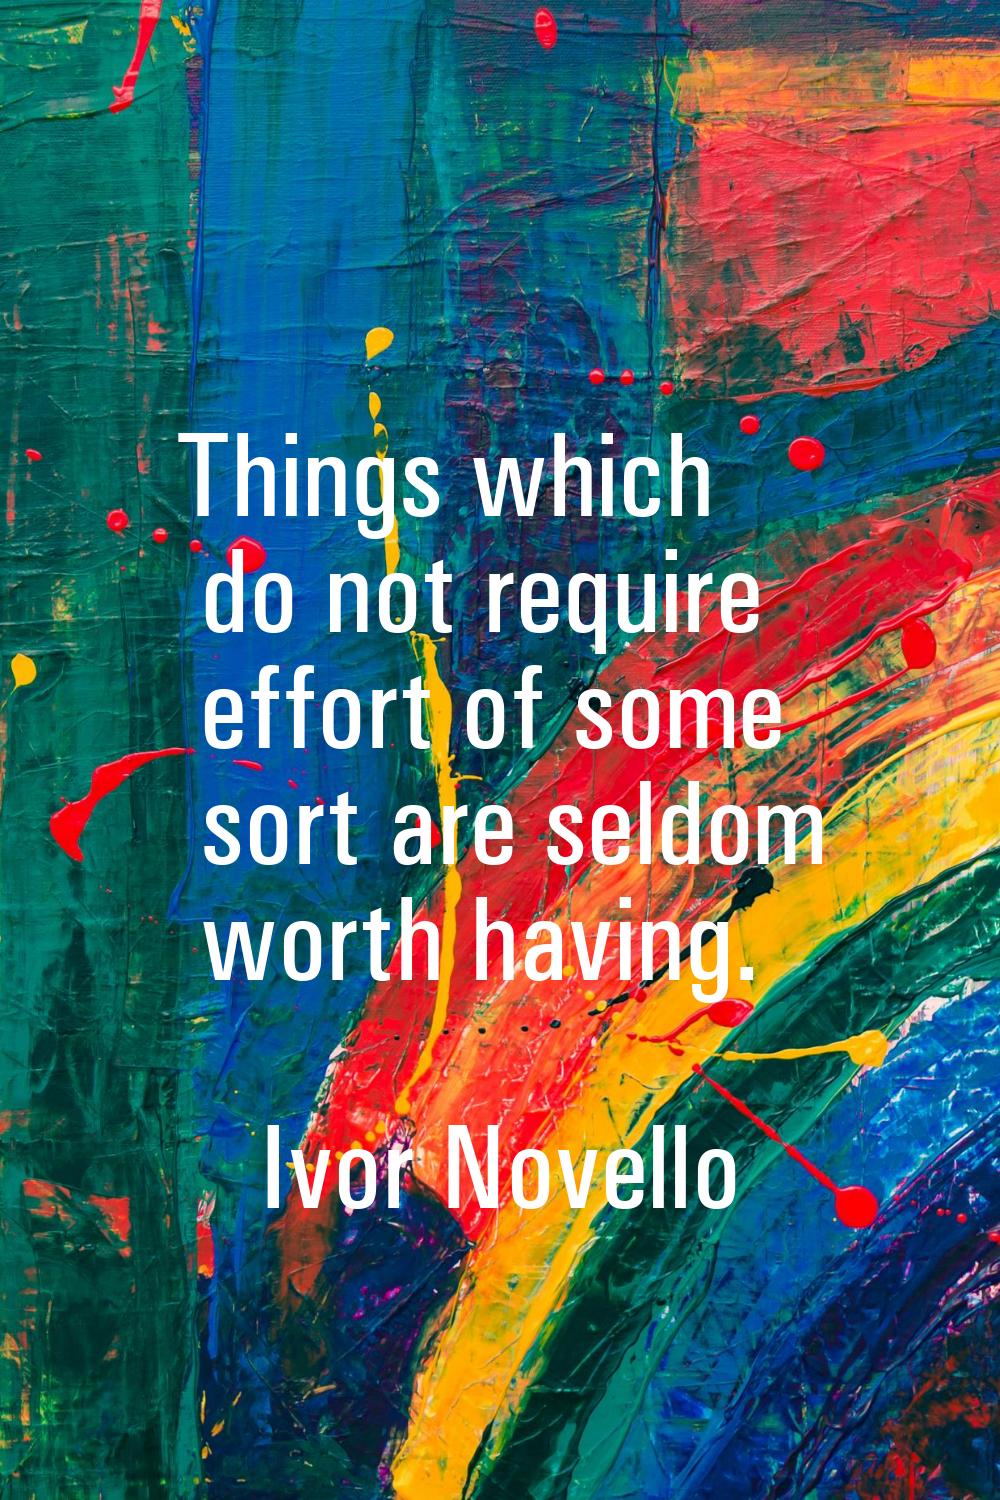 Things which do not require effort of some sort are seldom worth having.